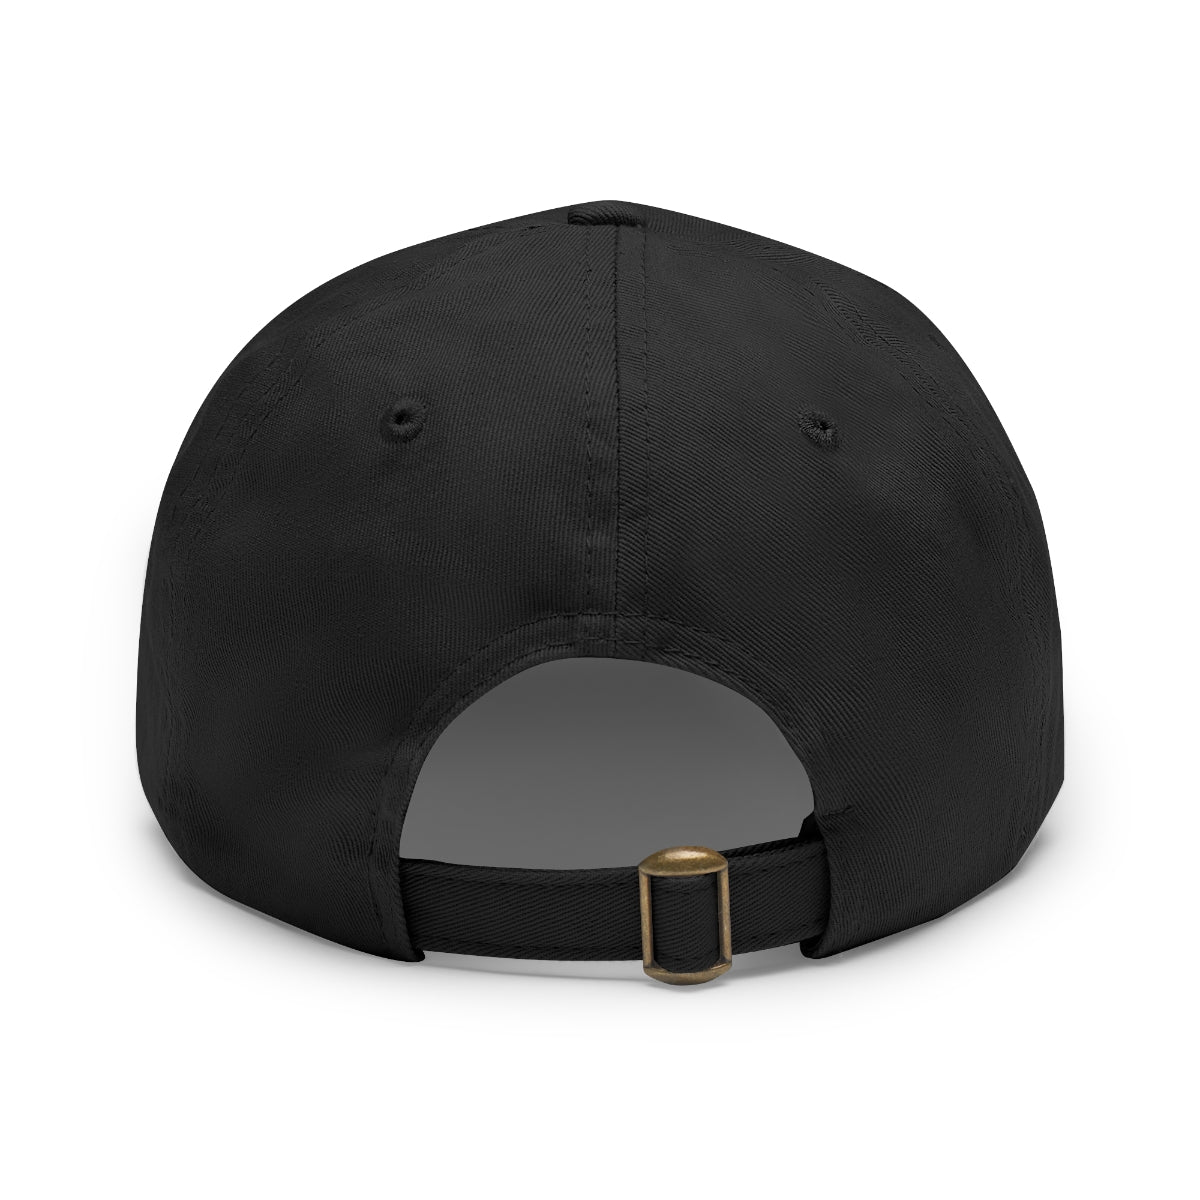 Field Staff Dad Hat with Leather Patch